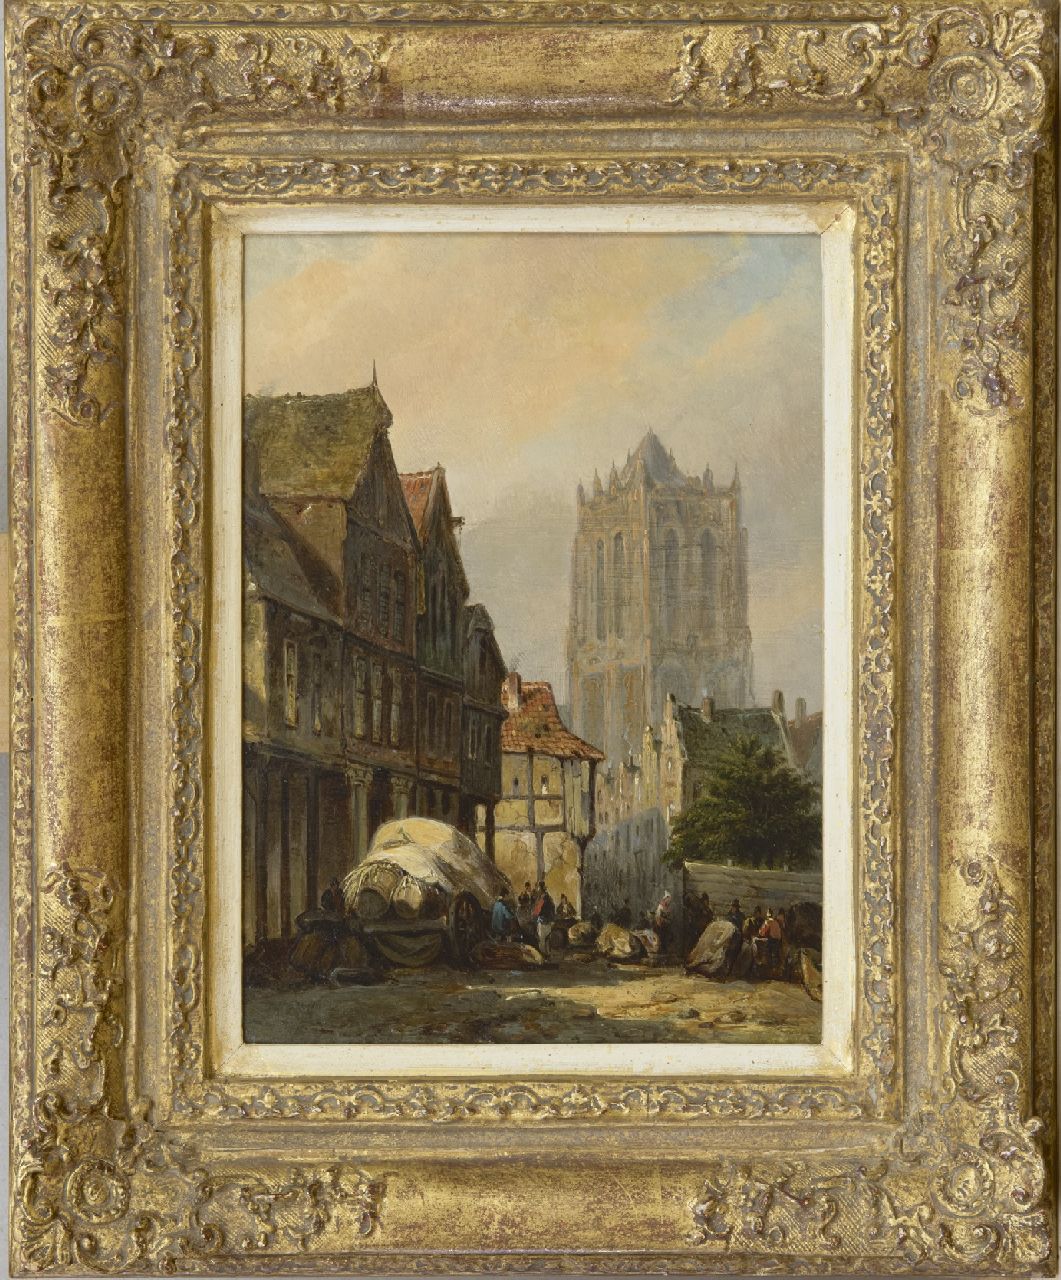 Bommel E.P. van | Elias Pieter van Bommel | Paintings offered for sale | A fantasy view of a Dutch town and the Sint-Lievensmonstertoren of Zierikzee, oil on panel 22.5 x 16.4 cm